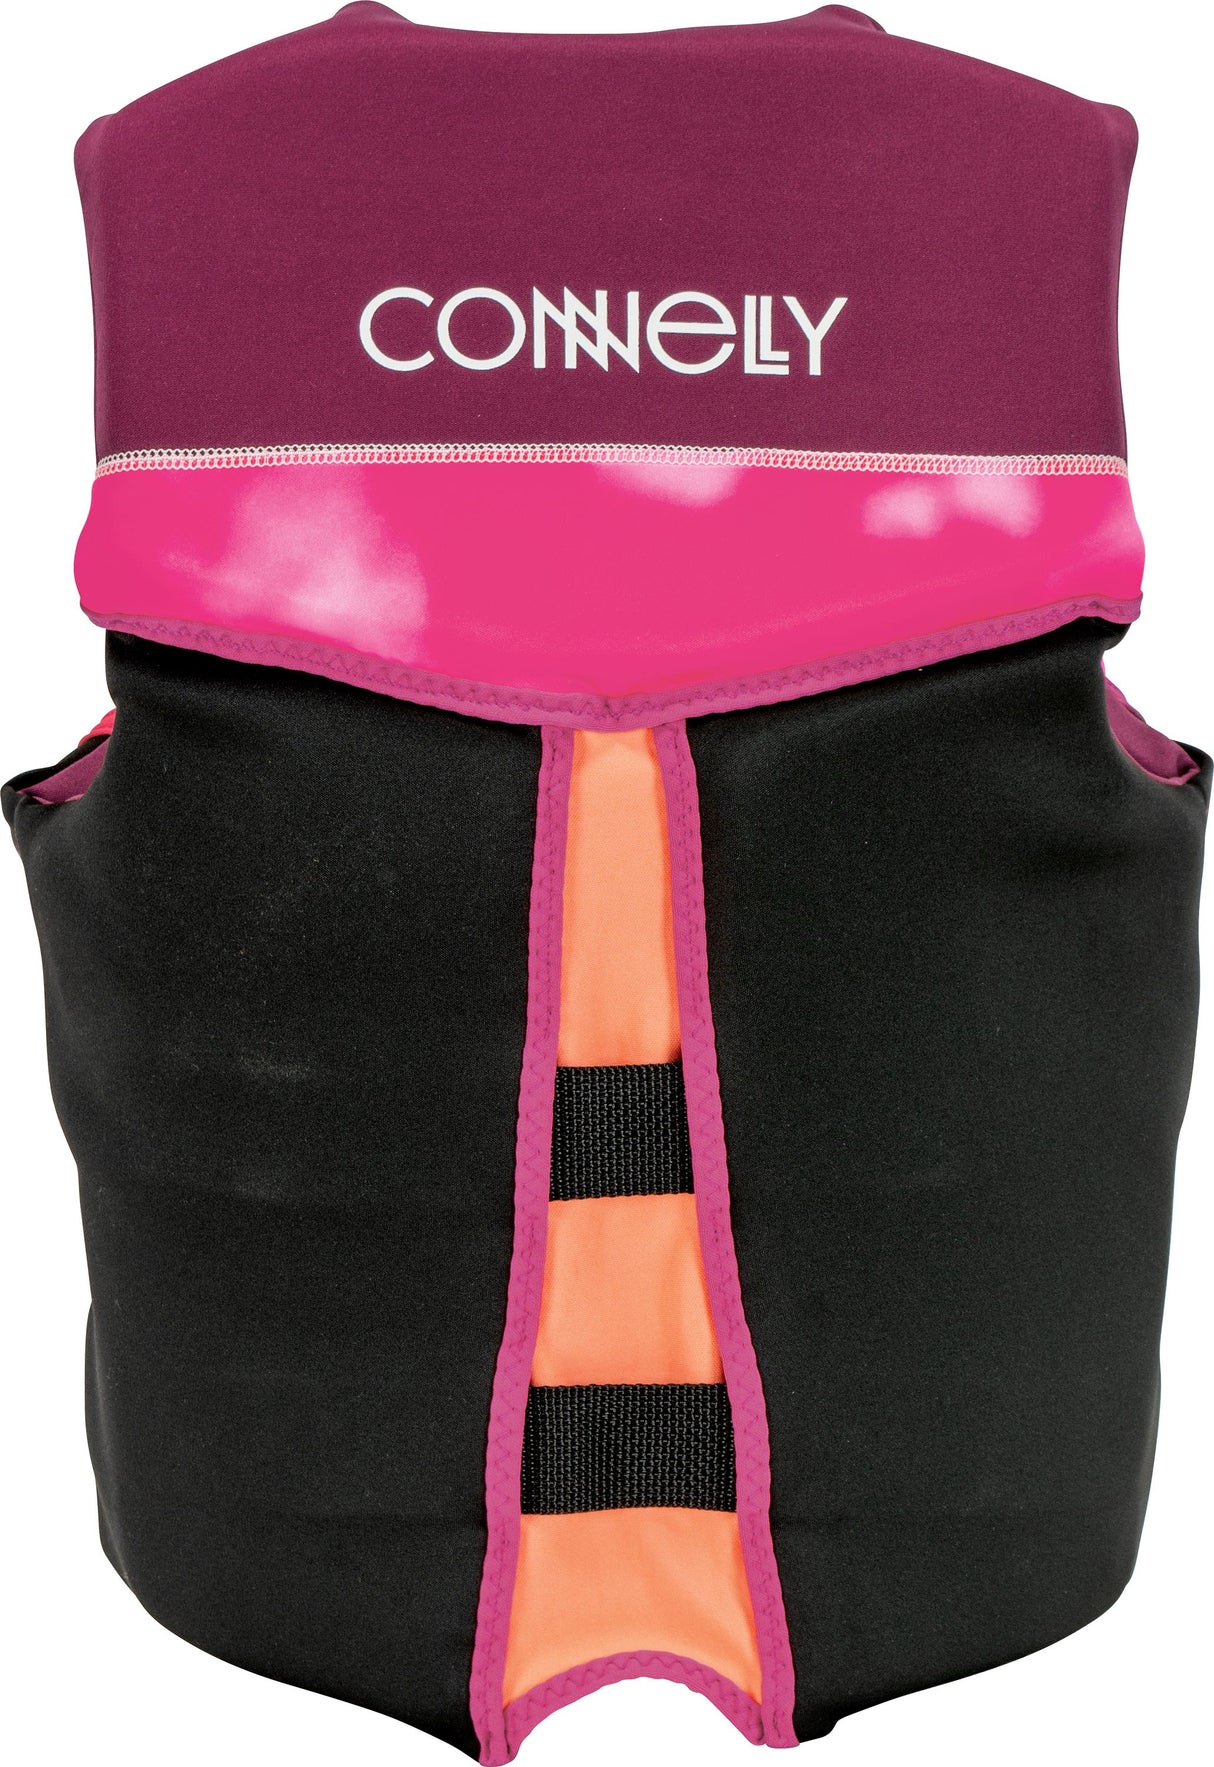 Connelly - Women's Classic Neo Life Vest